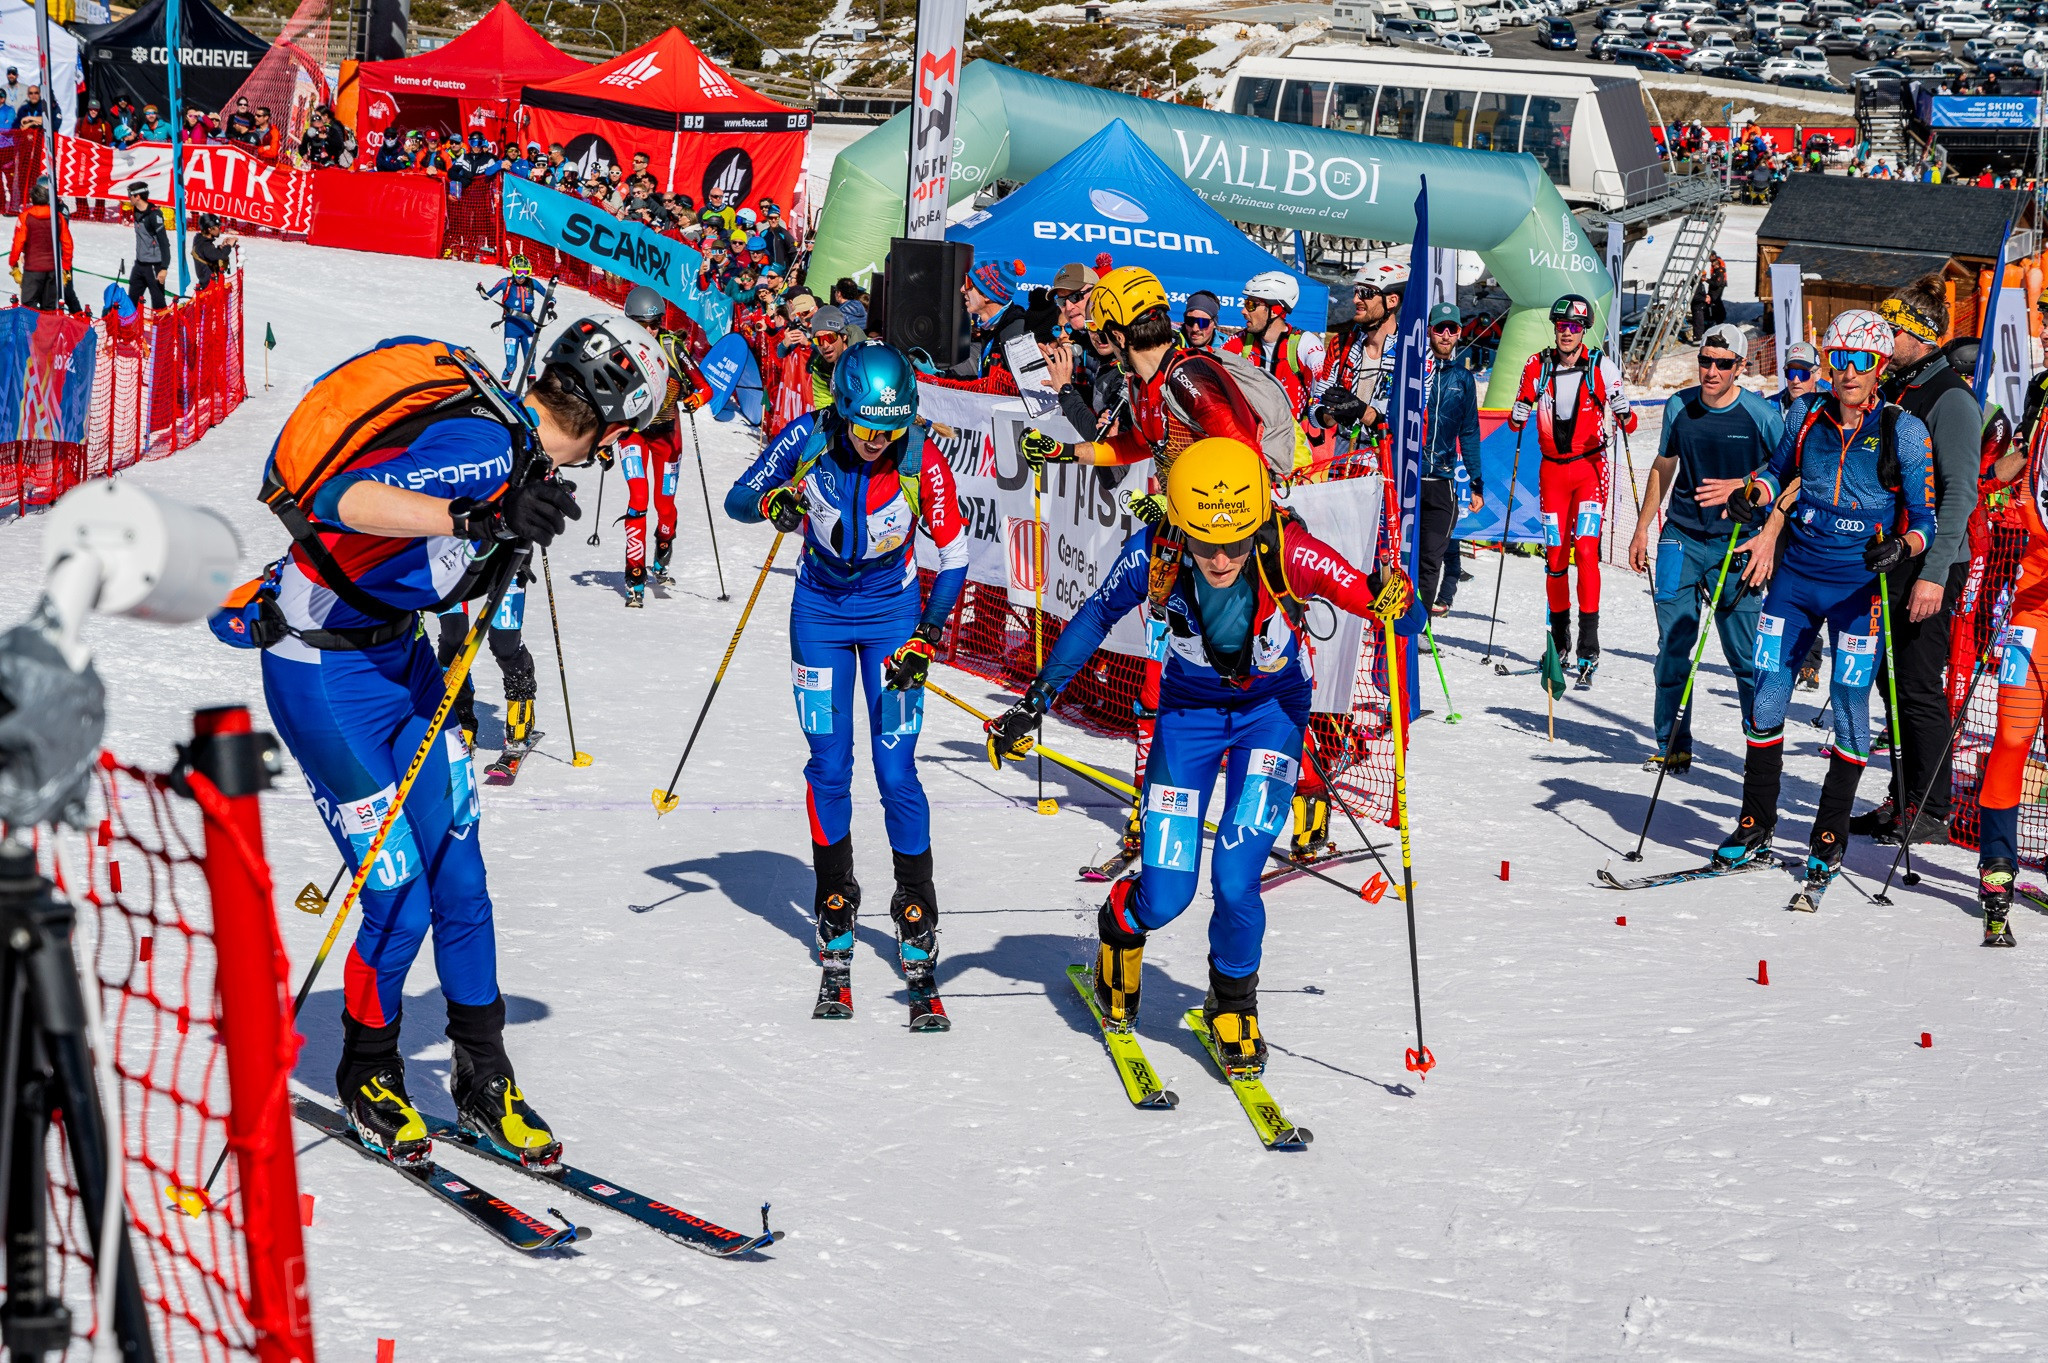 Emily Harrop and Thibault Anselmet battled hard to win a dramatic mixed relay race ©ISMF